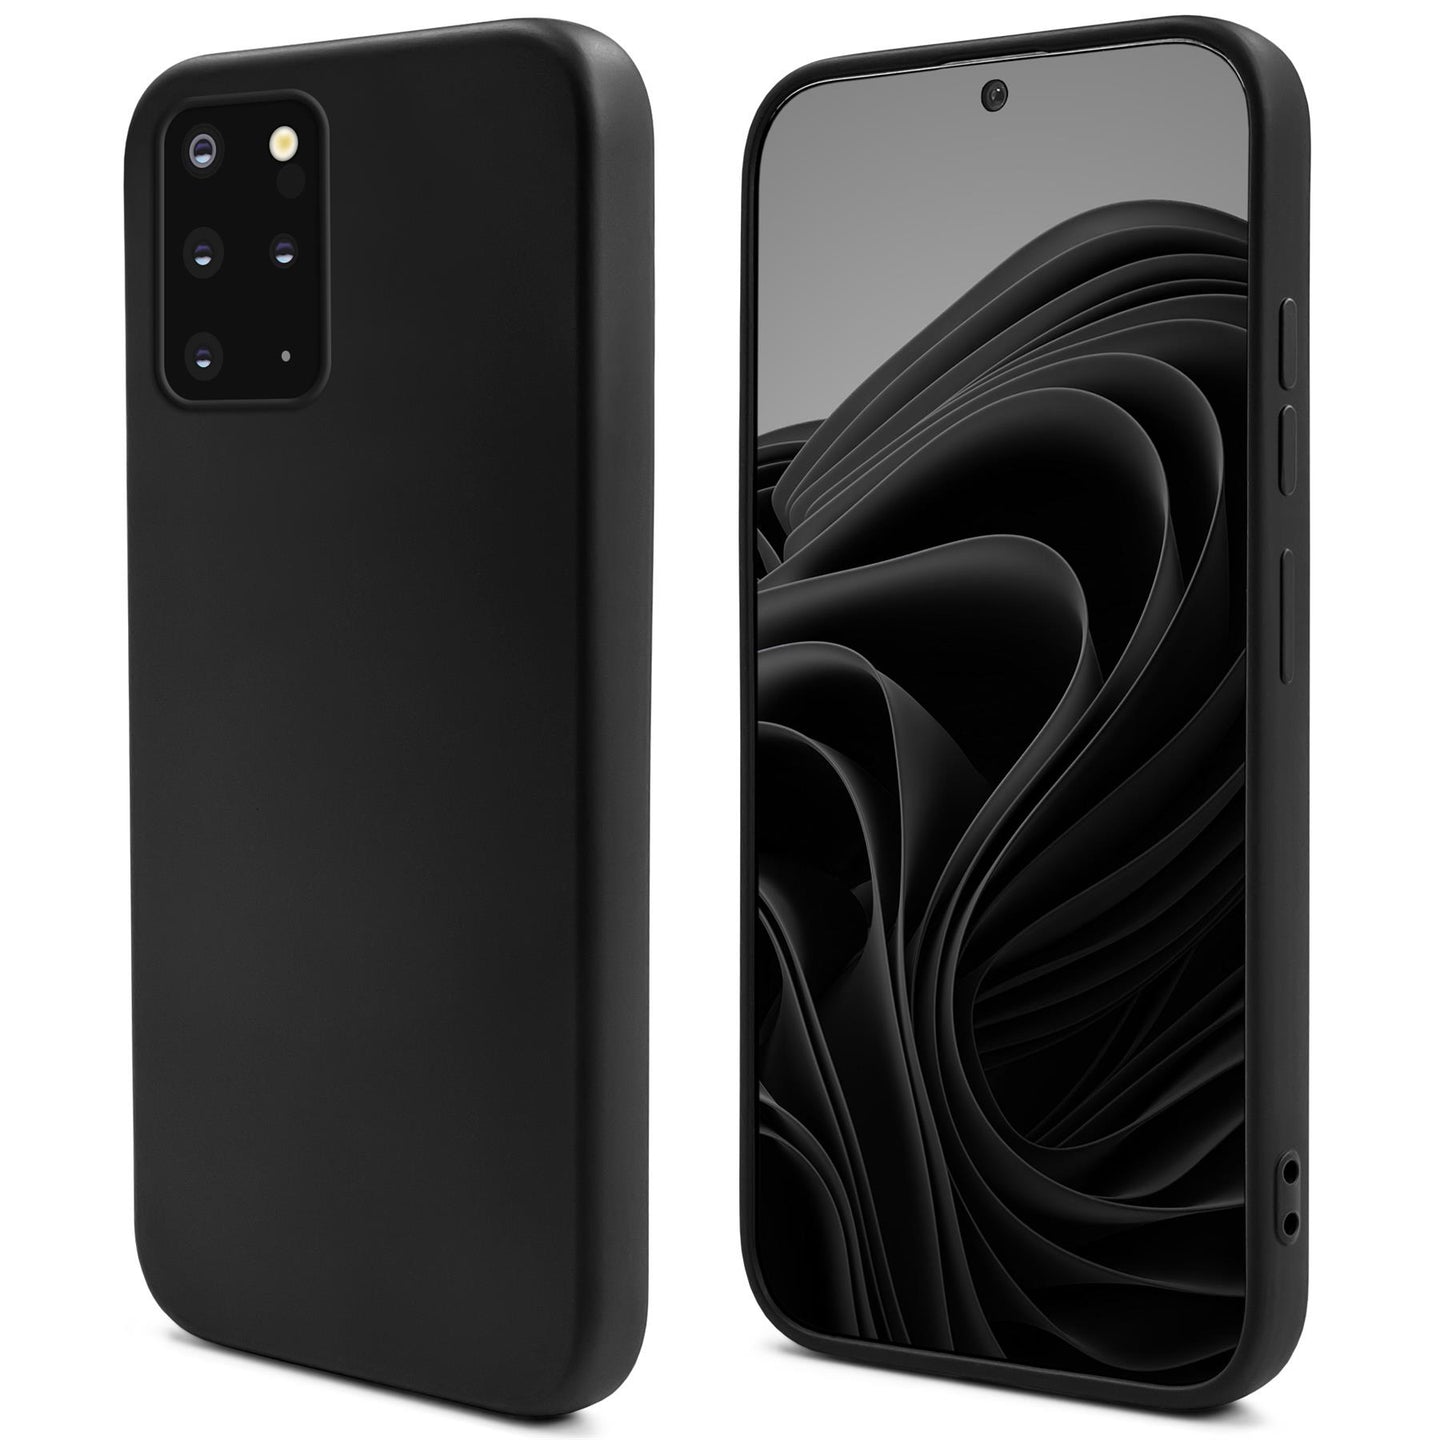 Moozy Lifestyle. Silicone Case for Samsung S20 Plus, Black - Liquid Silicone Lightweight Cover with Matte Finish and Soft Microfiber Lining, Premium Silicone Case